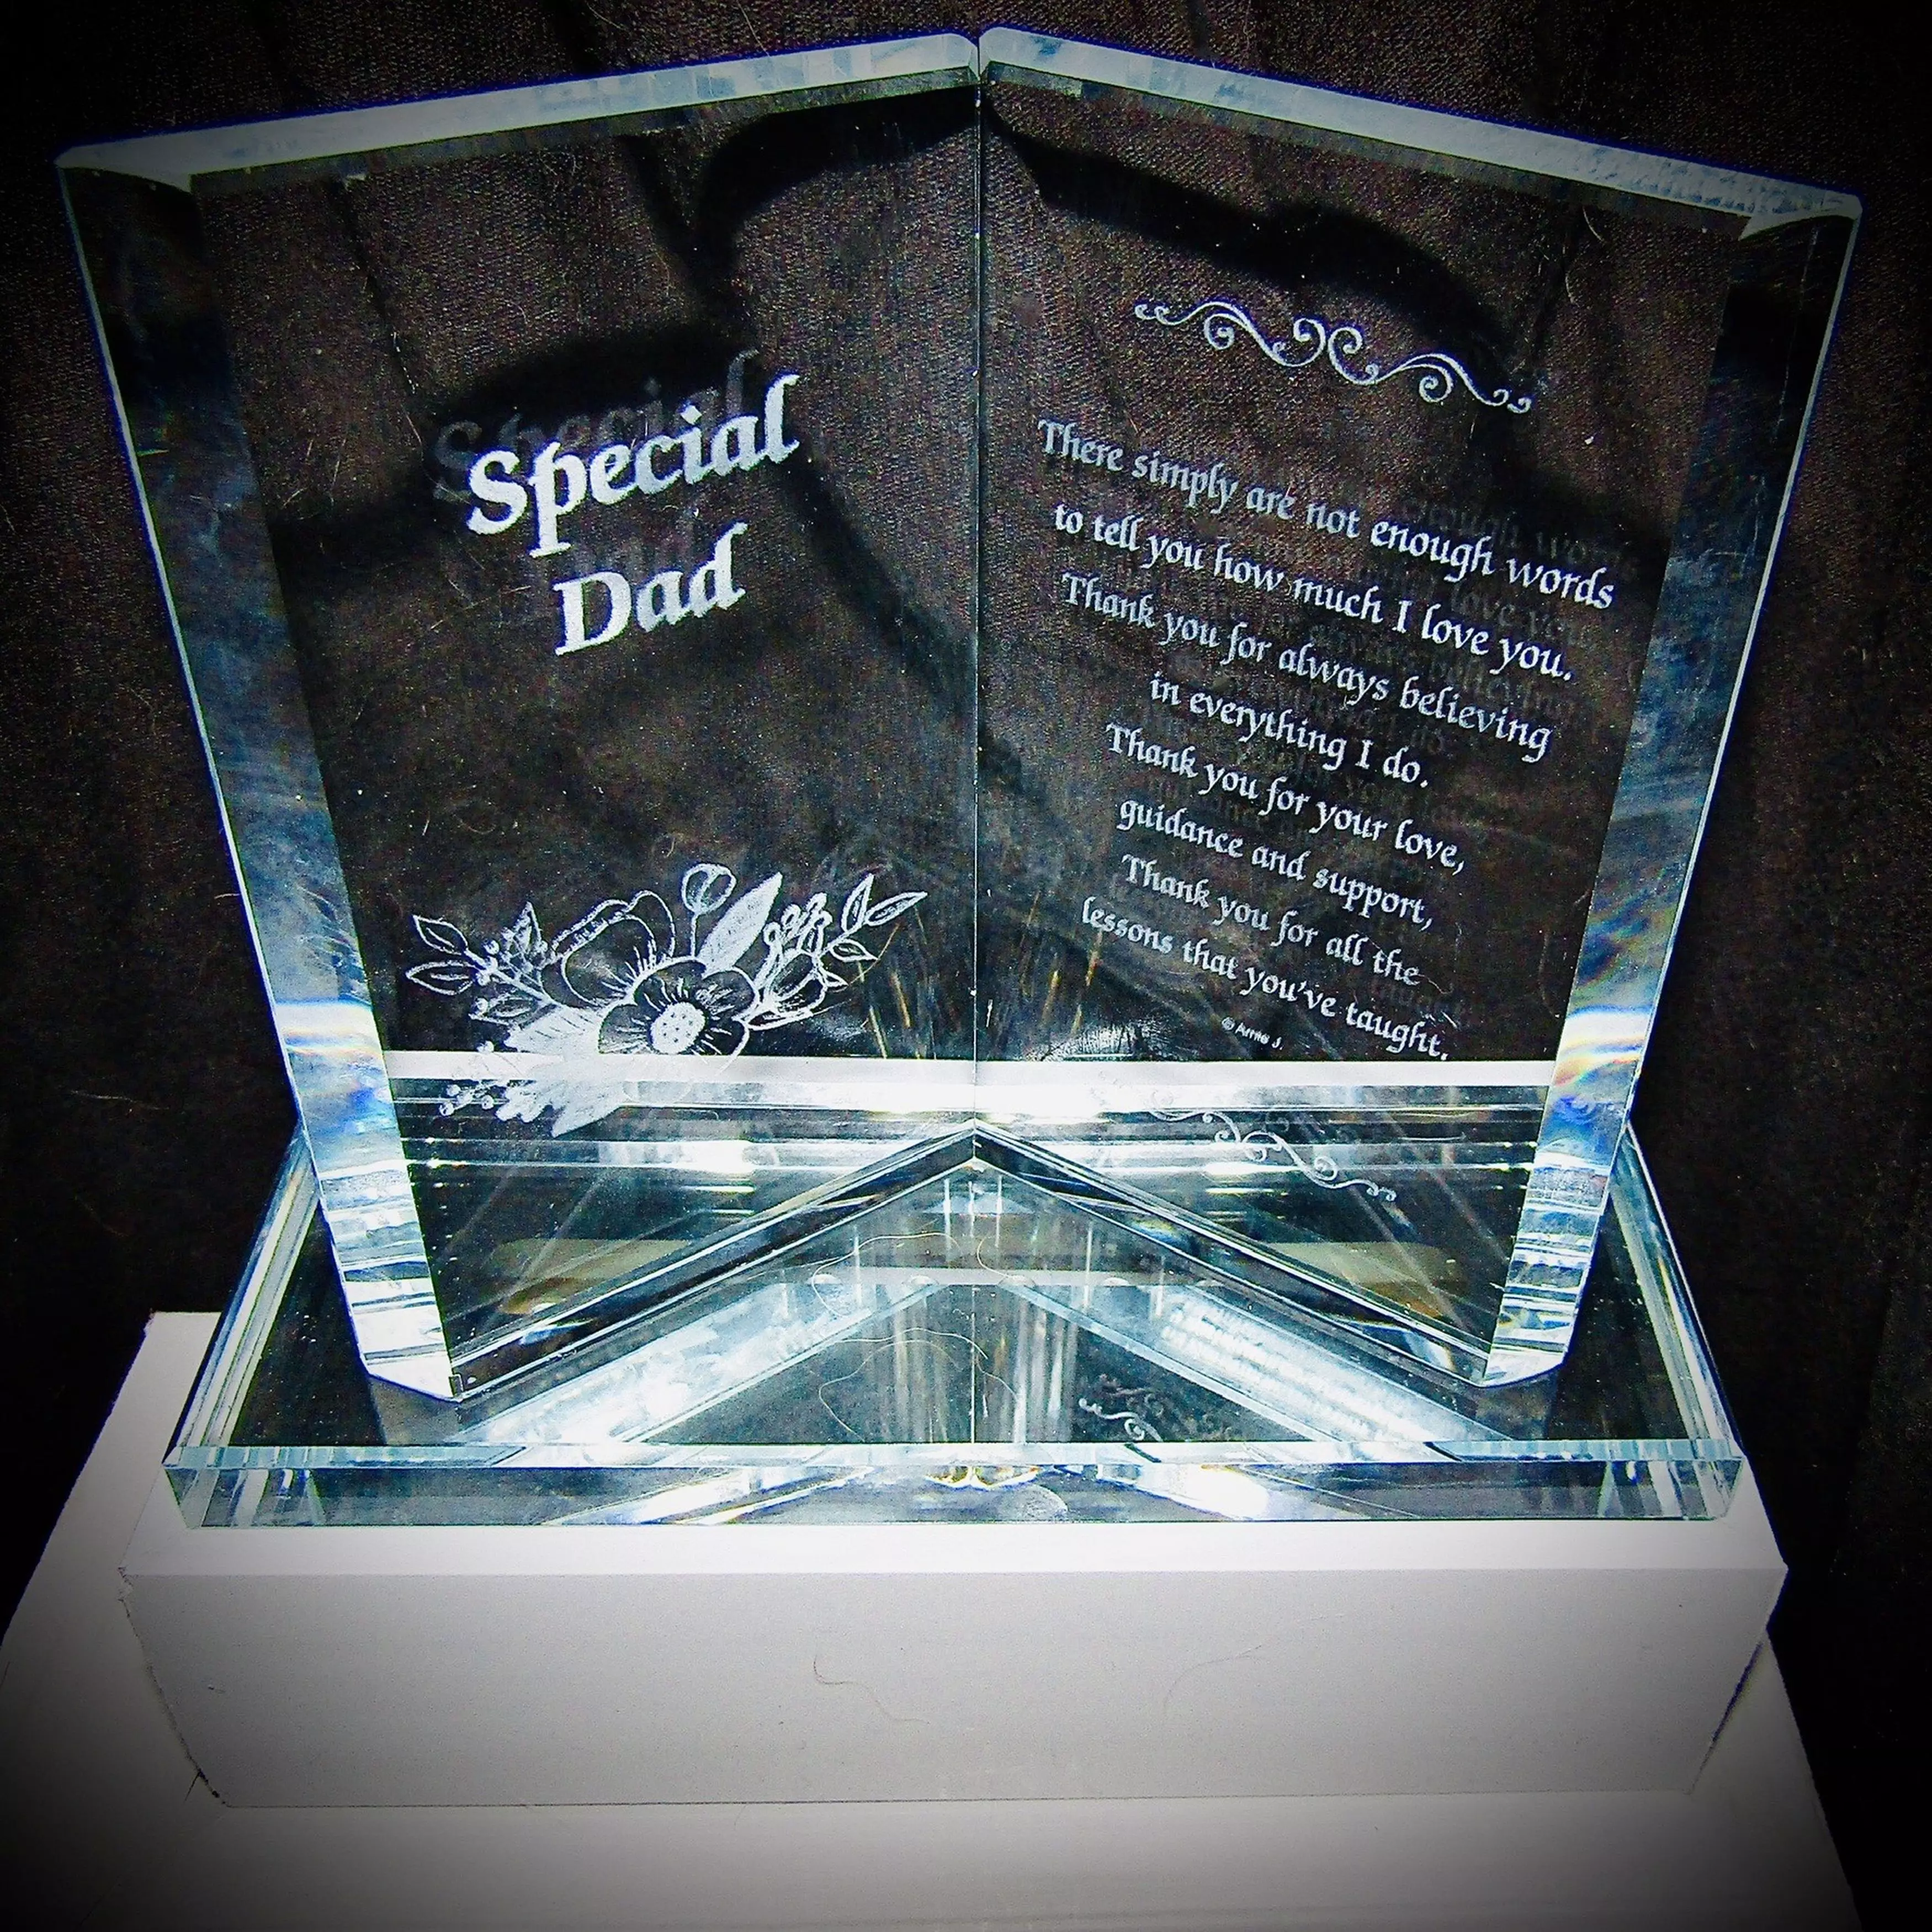 At 2am, Amber spotted a 'cute' £10.95 light-up plaque dedicated to a special dad, ordered it and even paid an extra £4 for speedy delivery (